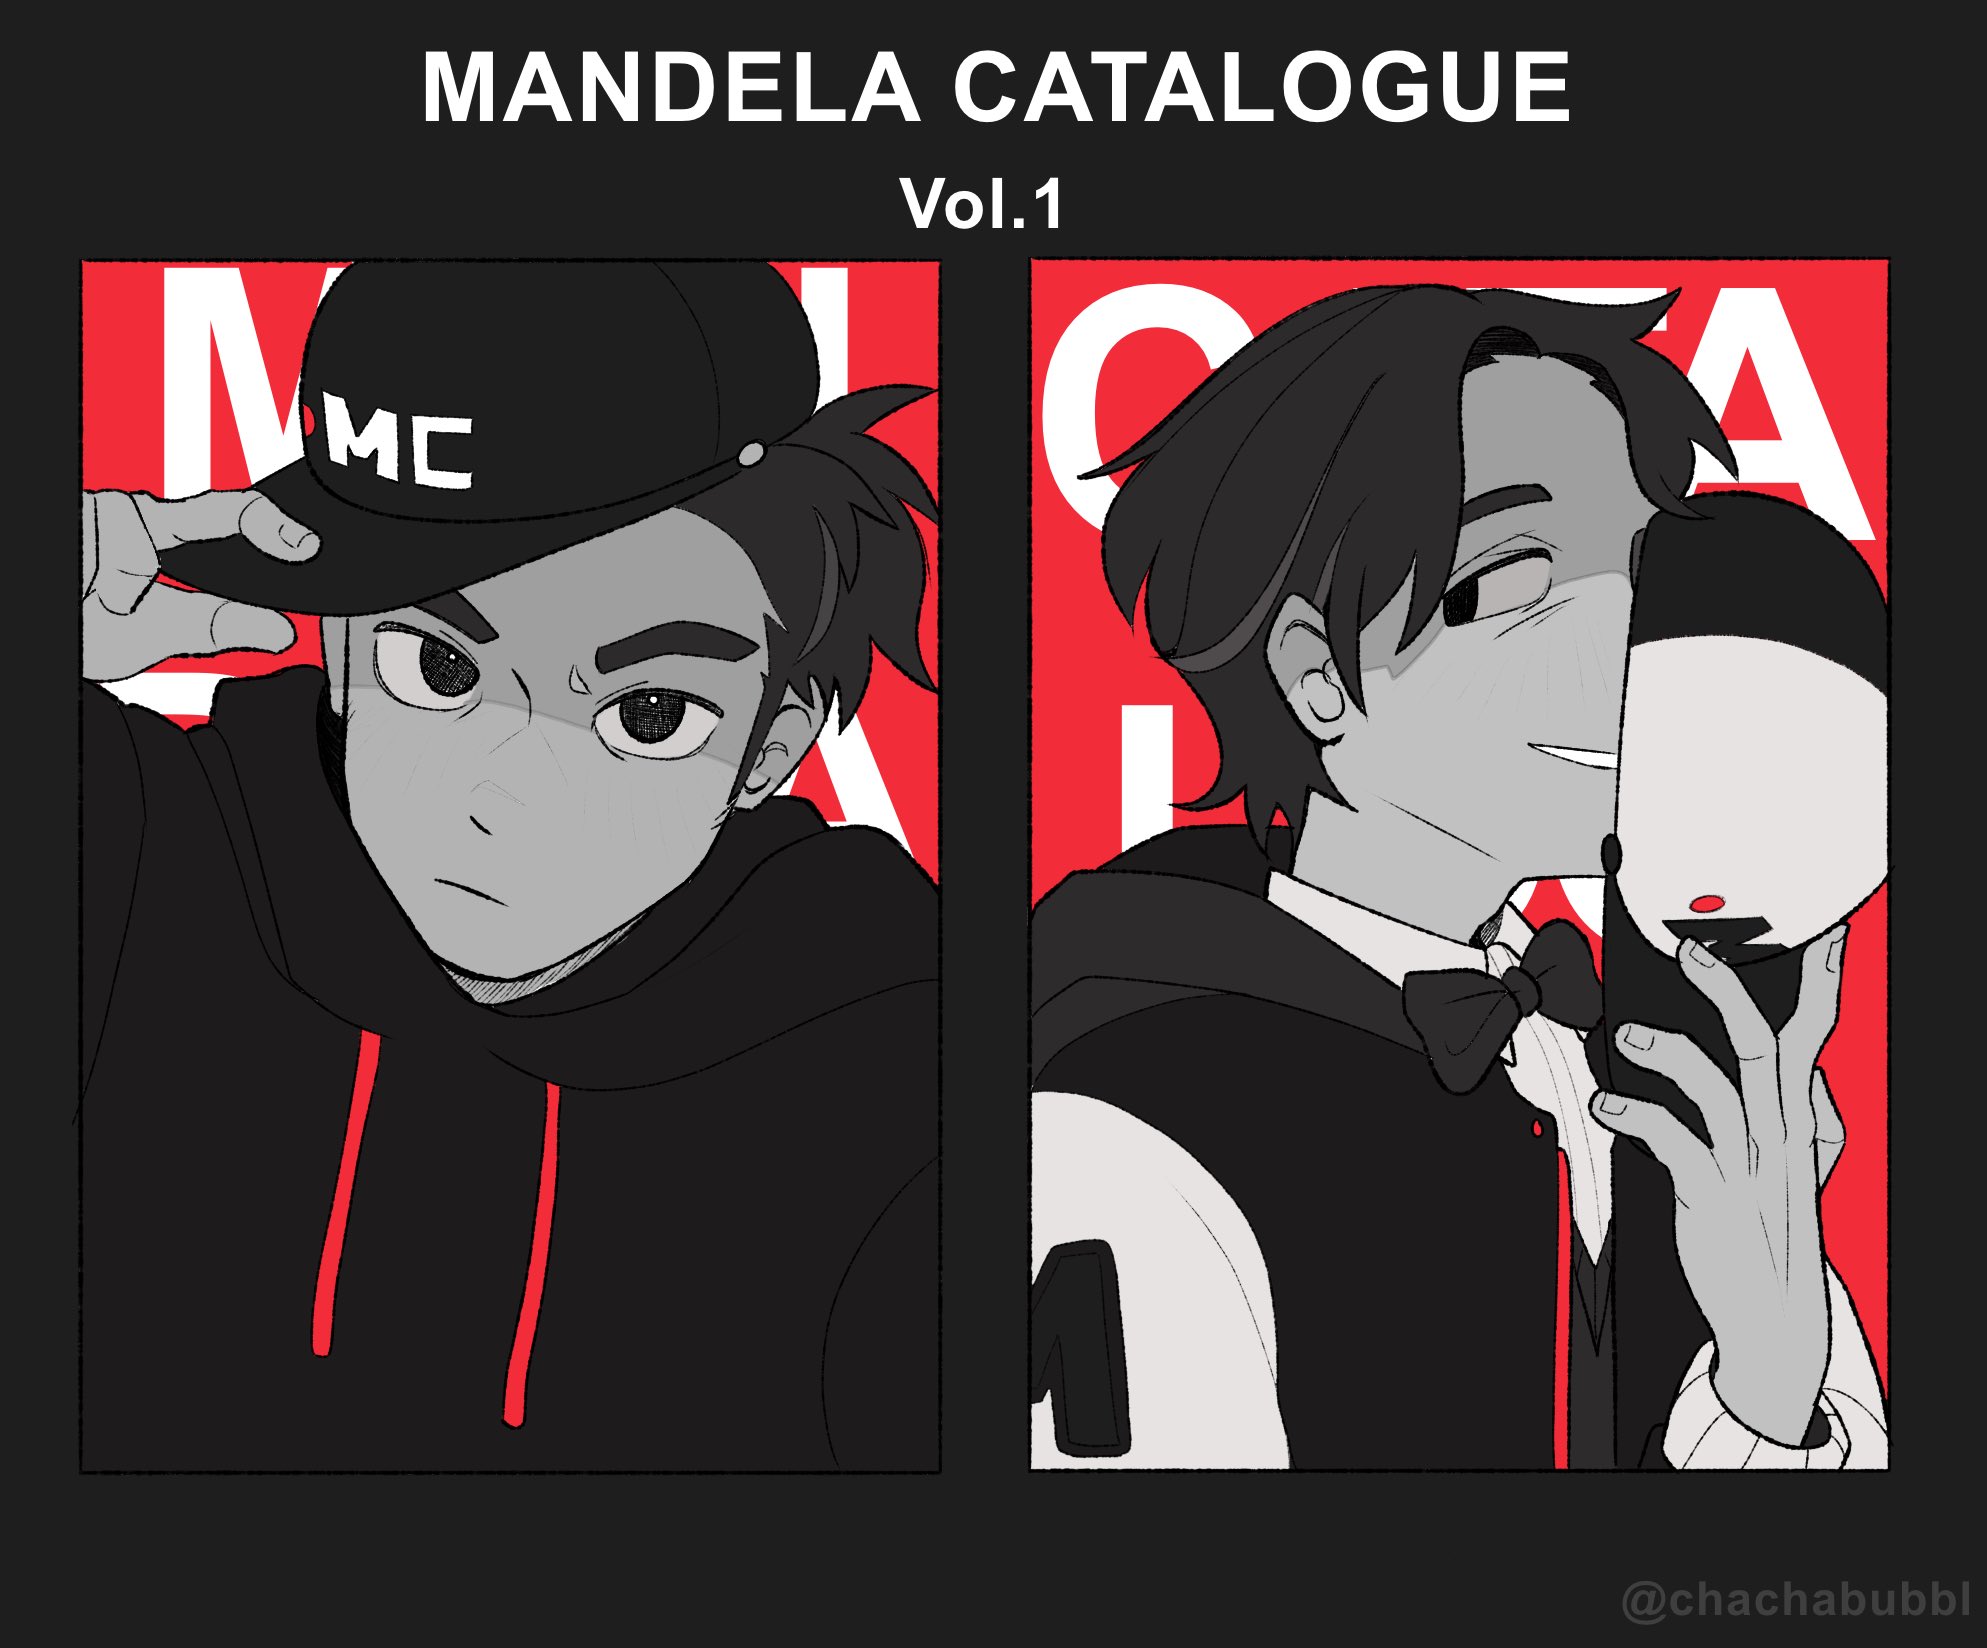 Cha Cha on X: [Mandela Catalogue] I got covid so I guess it is the perfect  time to rewatch MC. ‼please rmb that these characters are based on the  authors and his